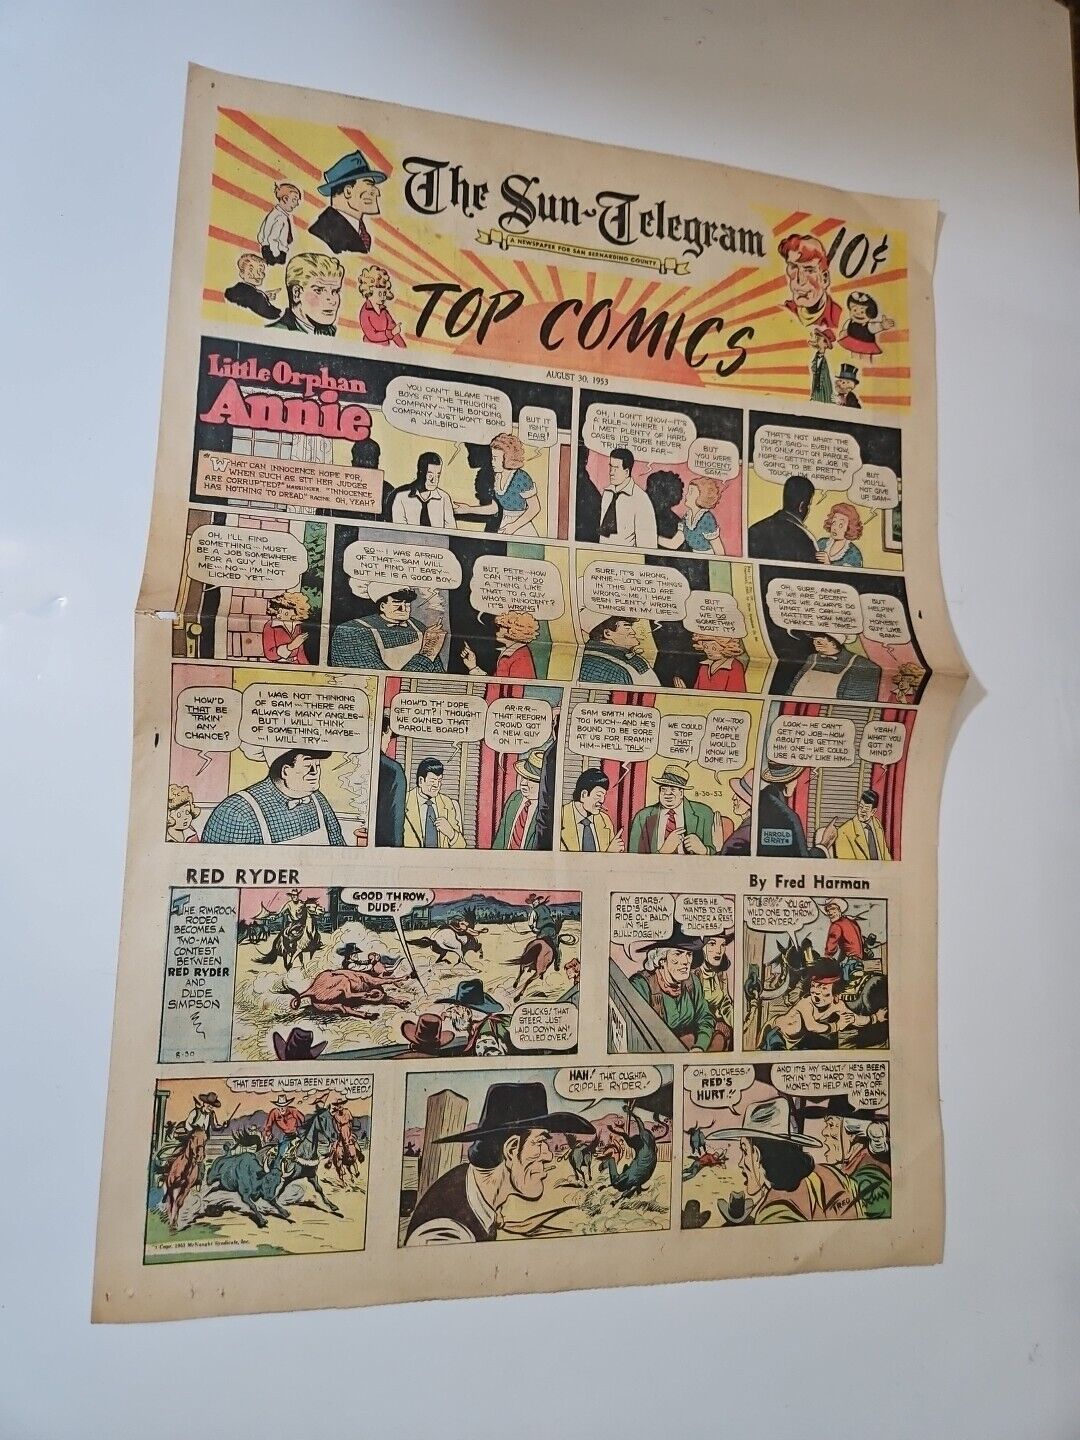 Little Orphan Annie Bugs Bunny Red Ryder Sunday Newspaper Comic Section 1953